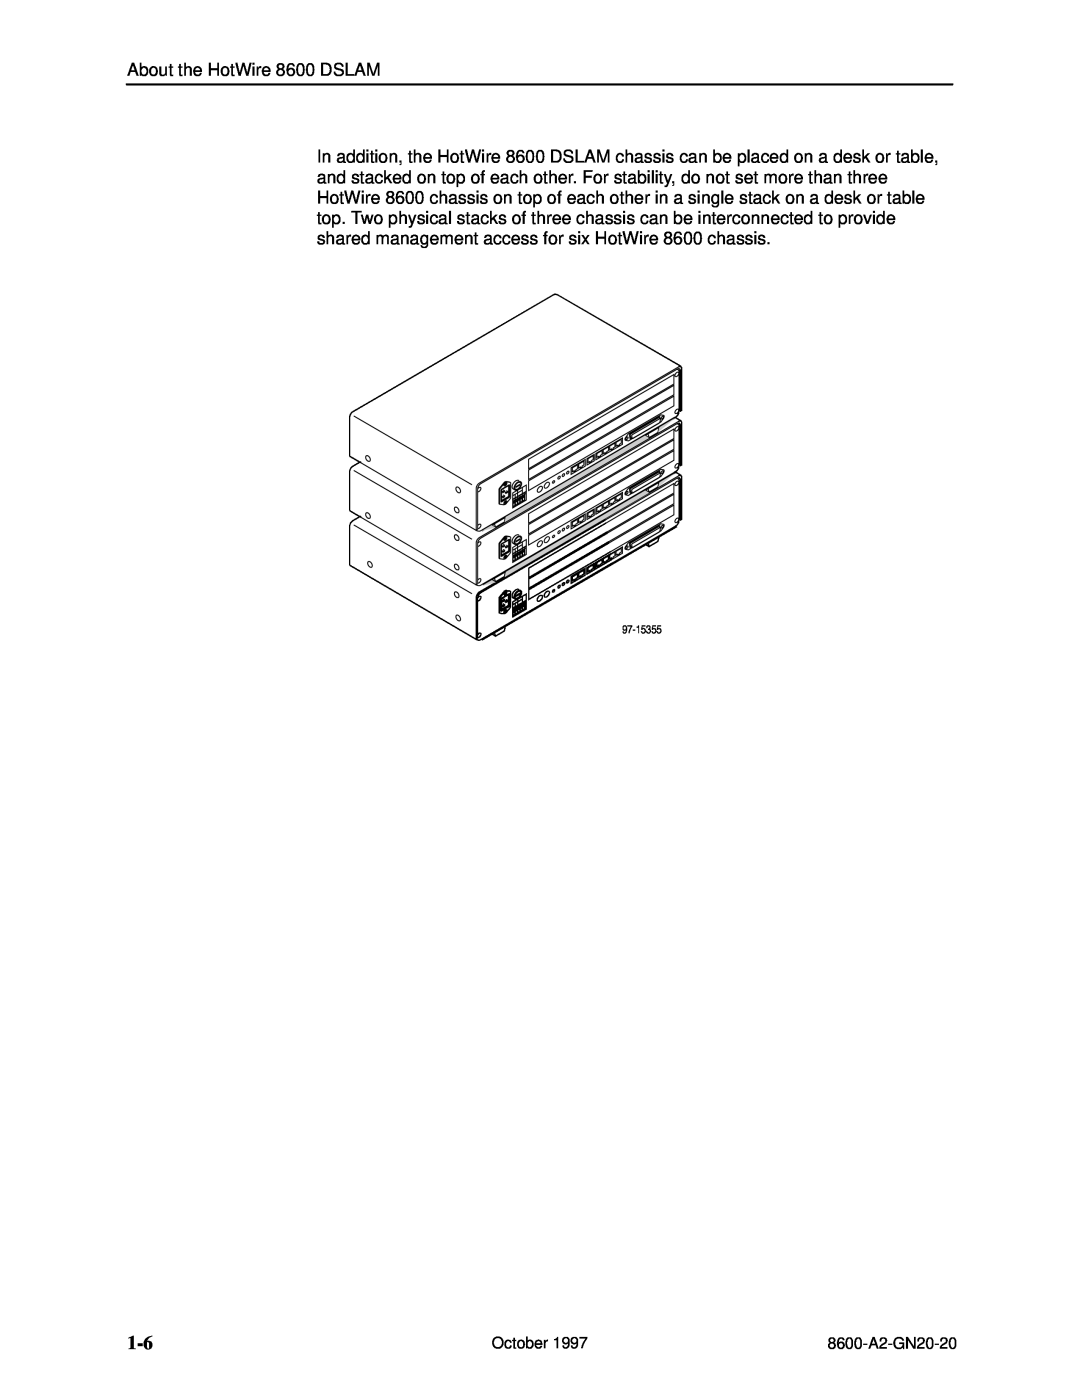 Nortel Networks manual About the HotWire 8600 DSLAM 